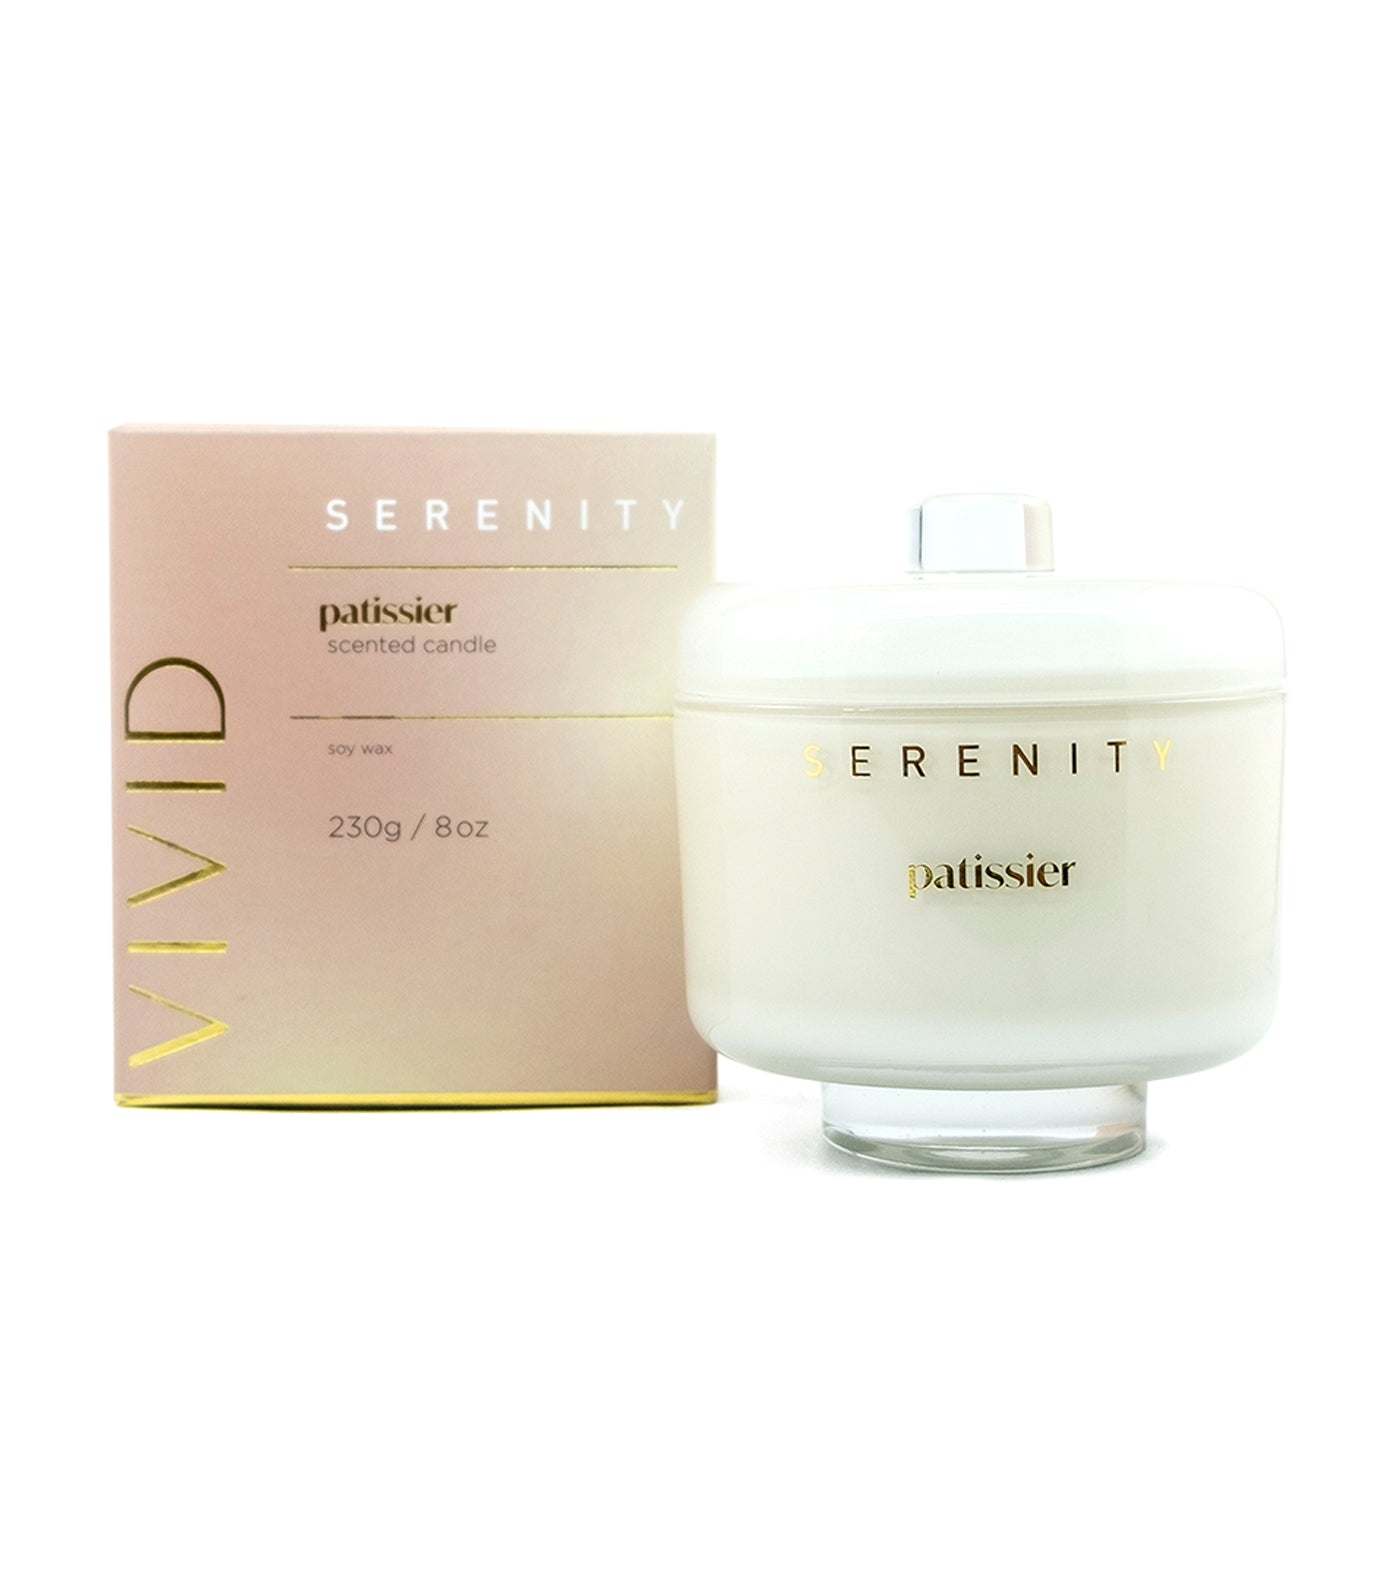 serenity vivid patissier scented candle